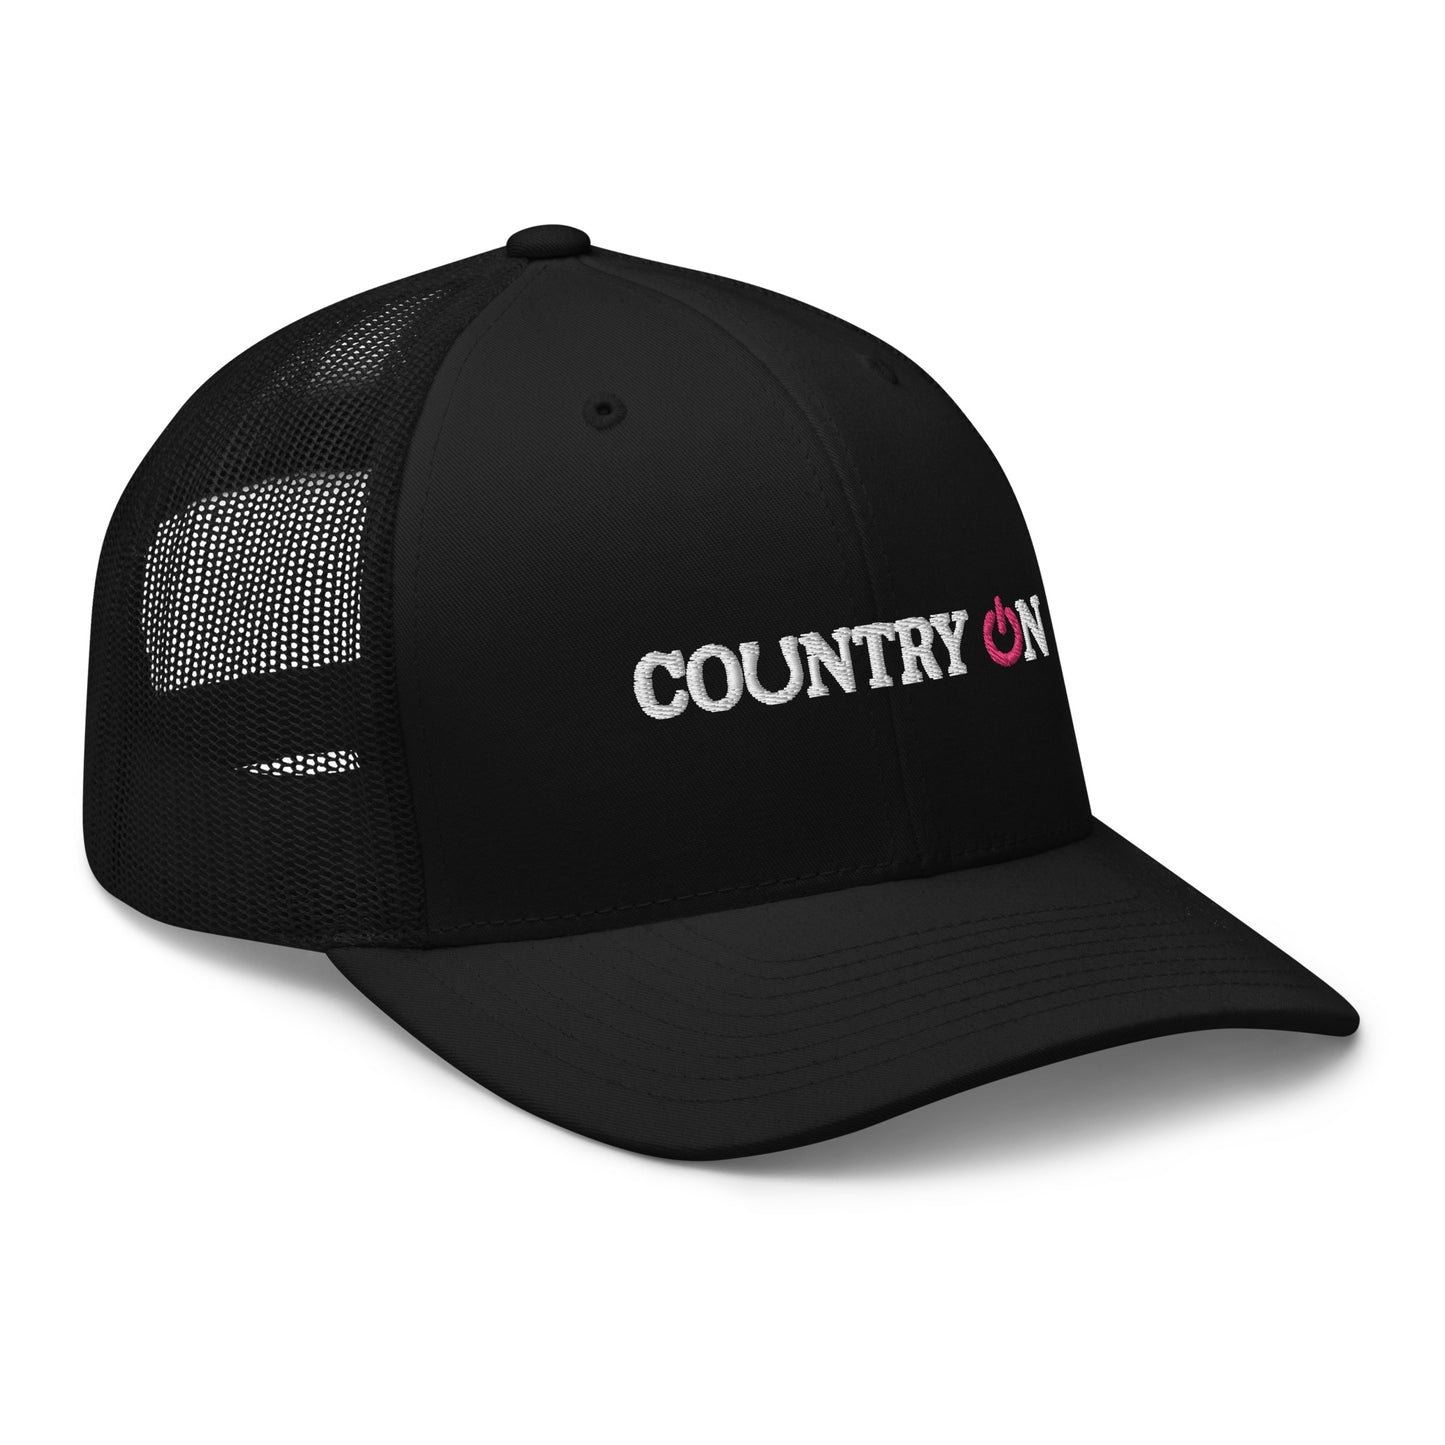 Country ON Trucker Cap